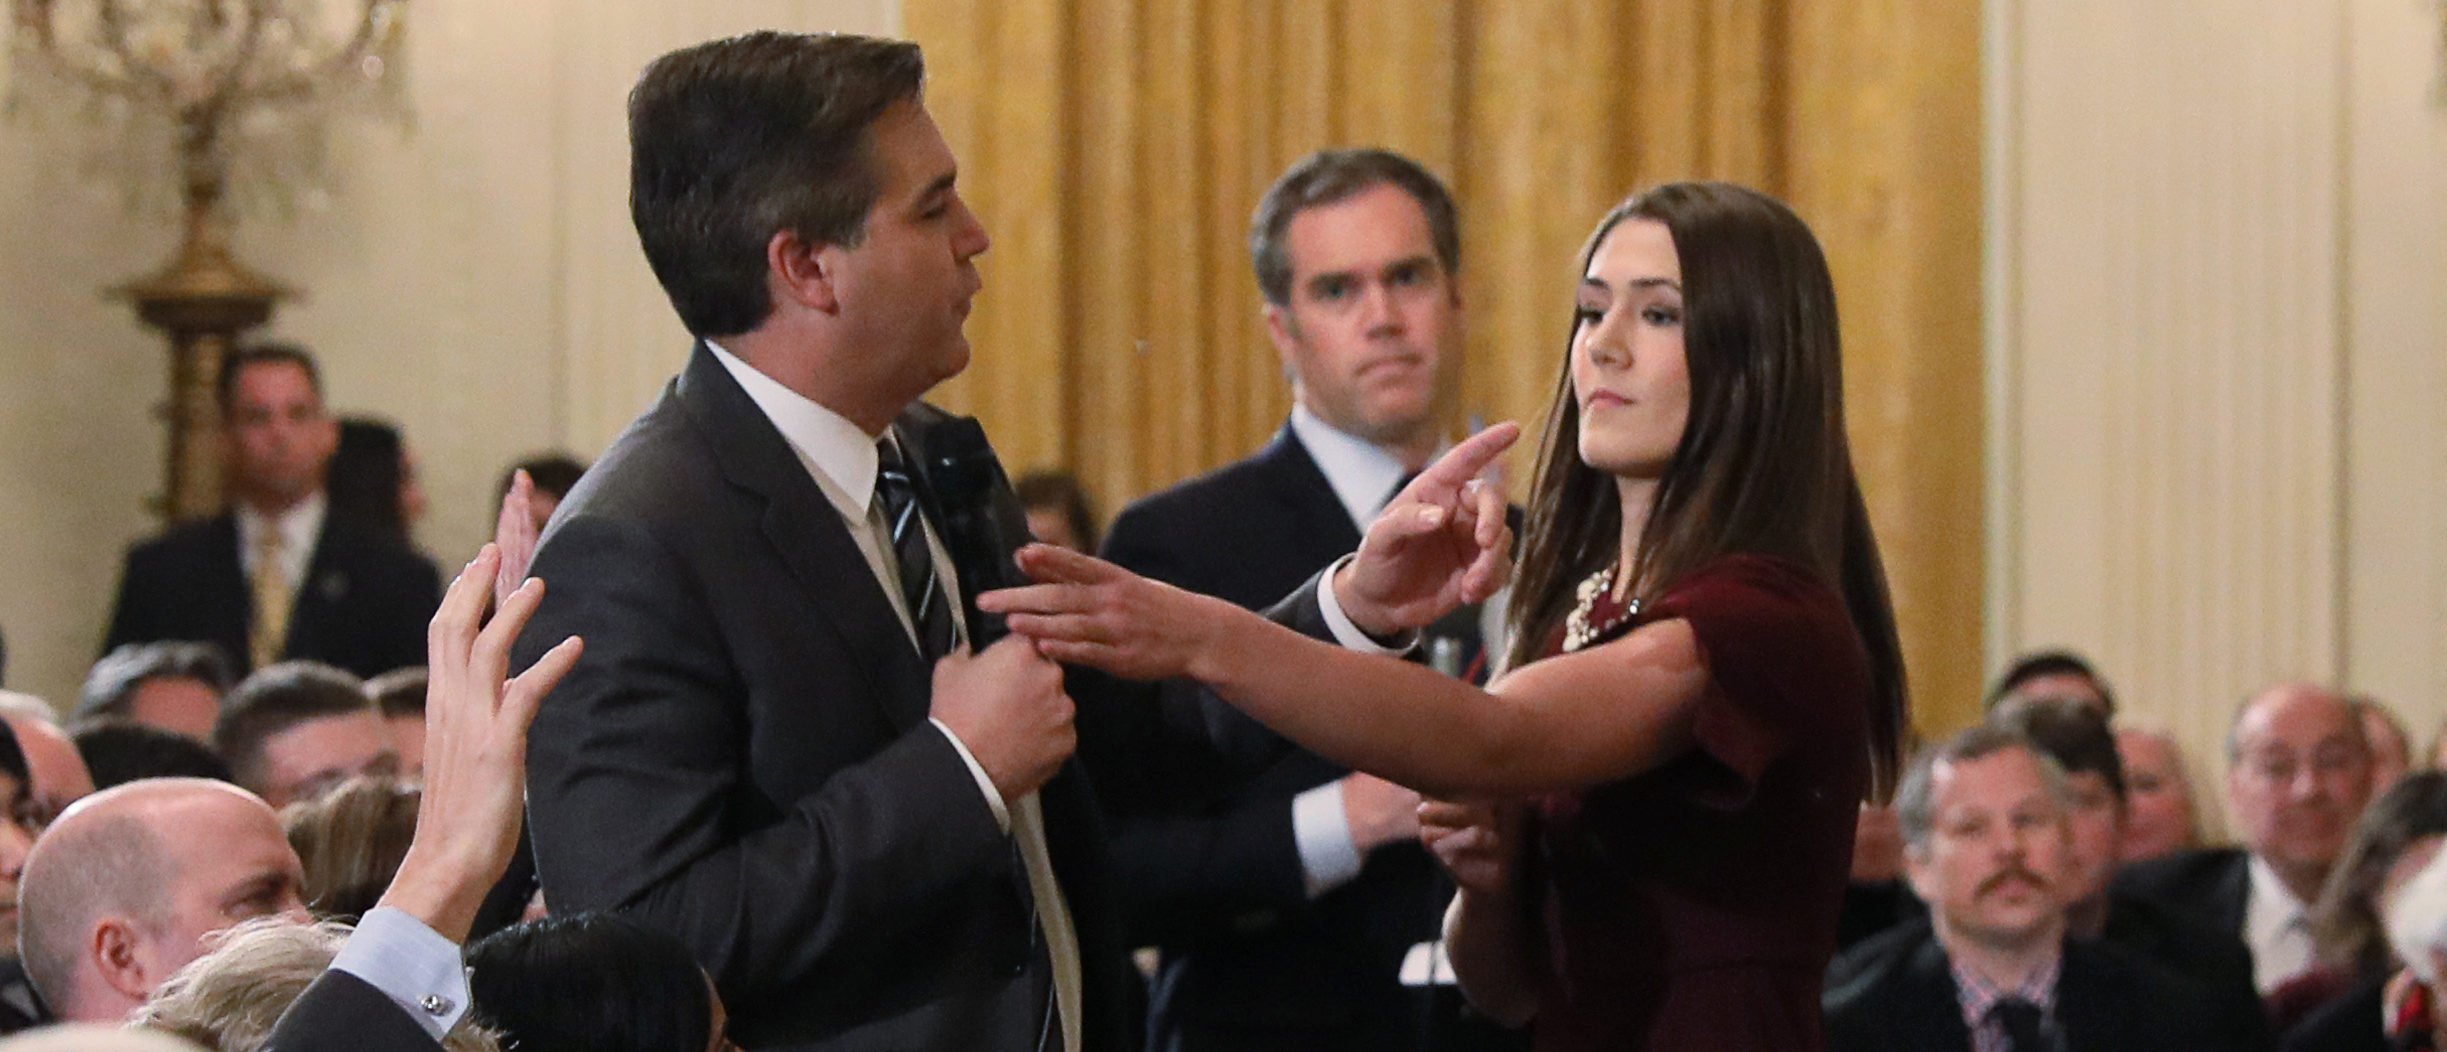 A White House intern reaches for and tries to take away the microphone held by CNN correspondent Jim Acosta as he questions President Donald Trump during a news conference at the White House in Washington, November 7, 2018. REUTERS/Jonathan Ernst